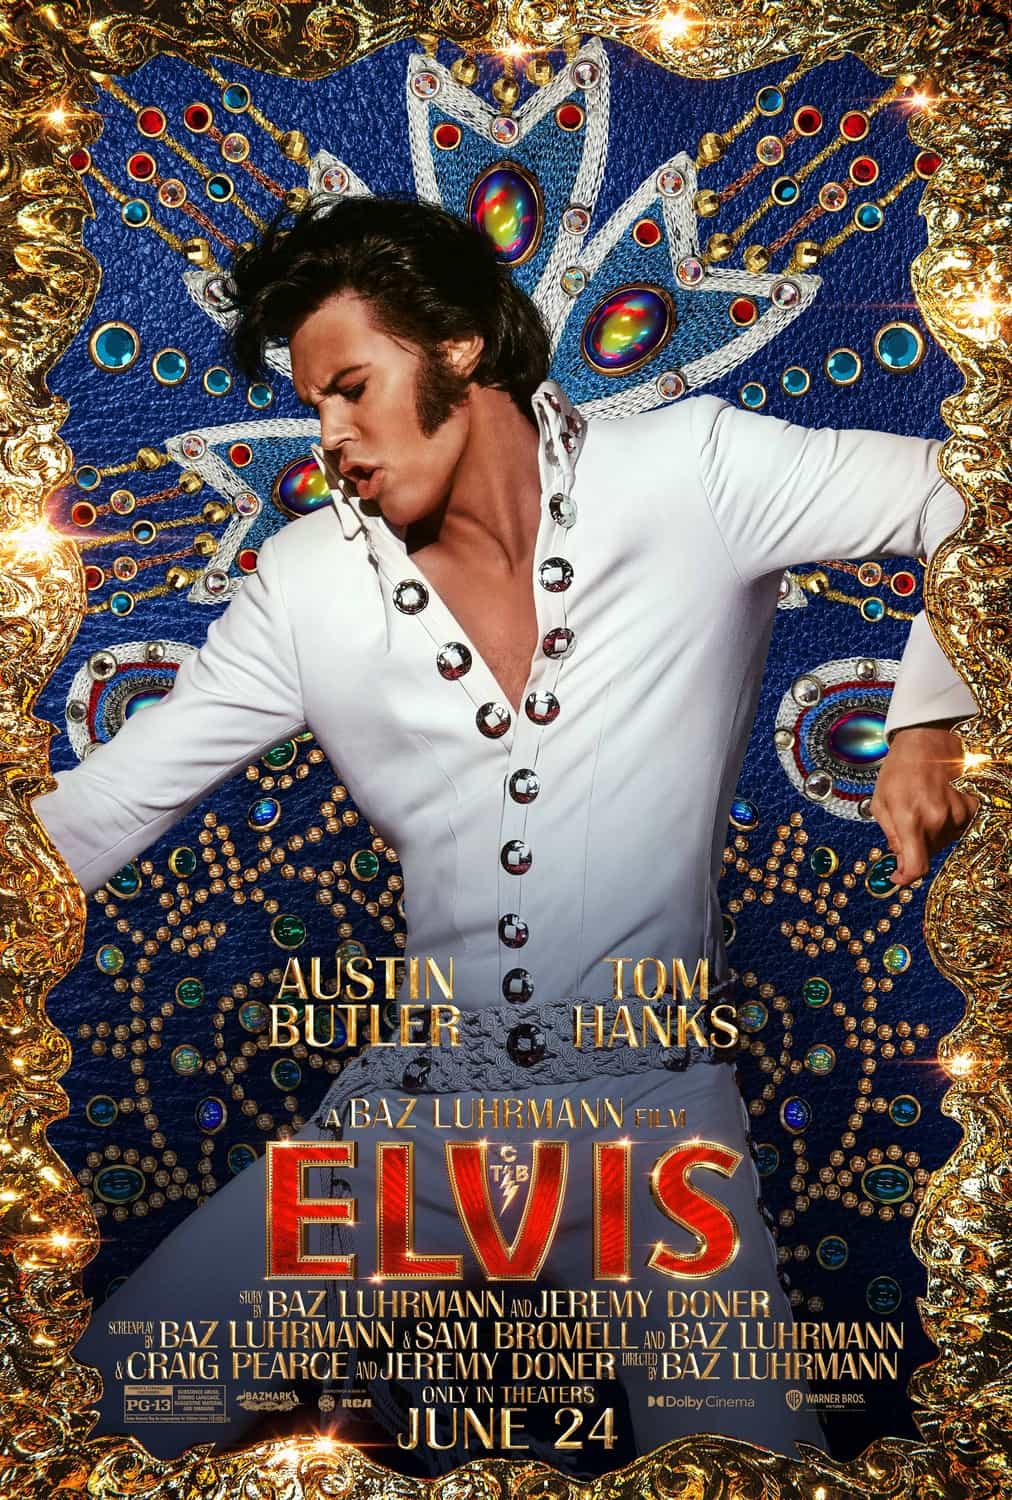 New trailer and poster for Elvis starring Tom Hanks and directed by Baz Luhrmann - UK release date 24th June 2022 #elvis